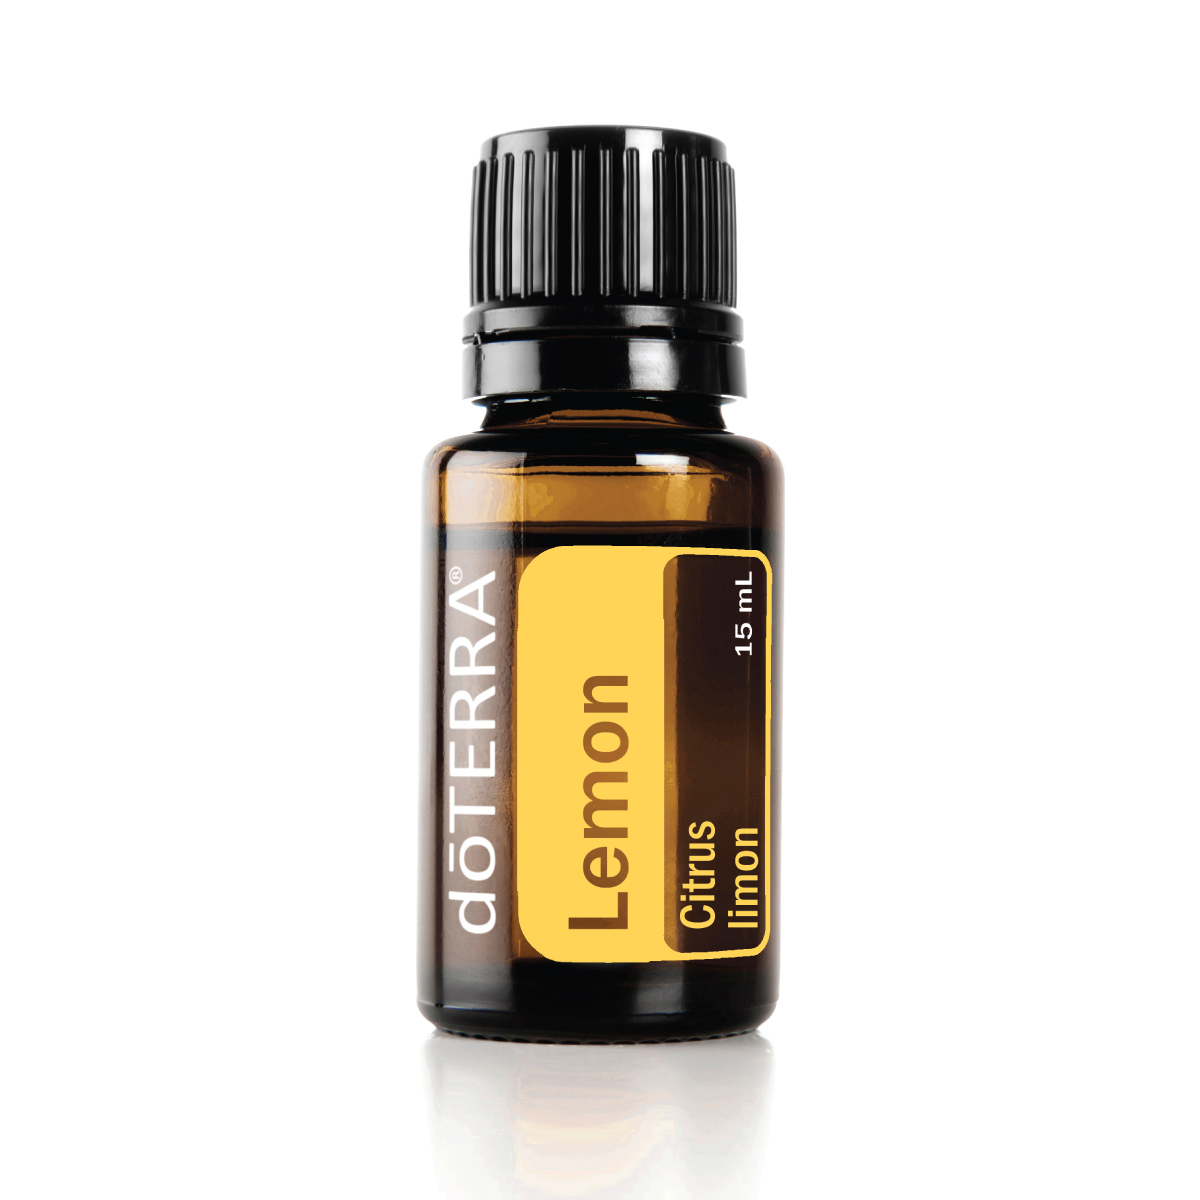 Bottle of doTERRA Lemon oil. What is Lemon essential oil used for? Lemon oil can be used for cooking, household cleaning, to uplift mood, and aid in digestion.